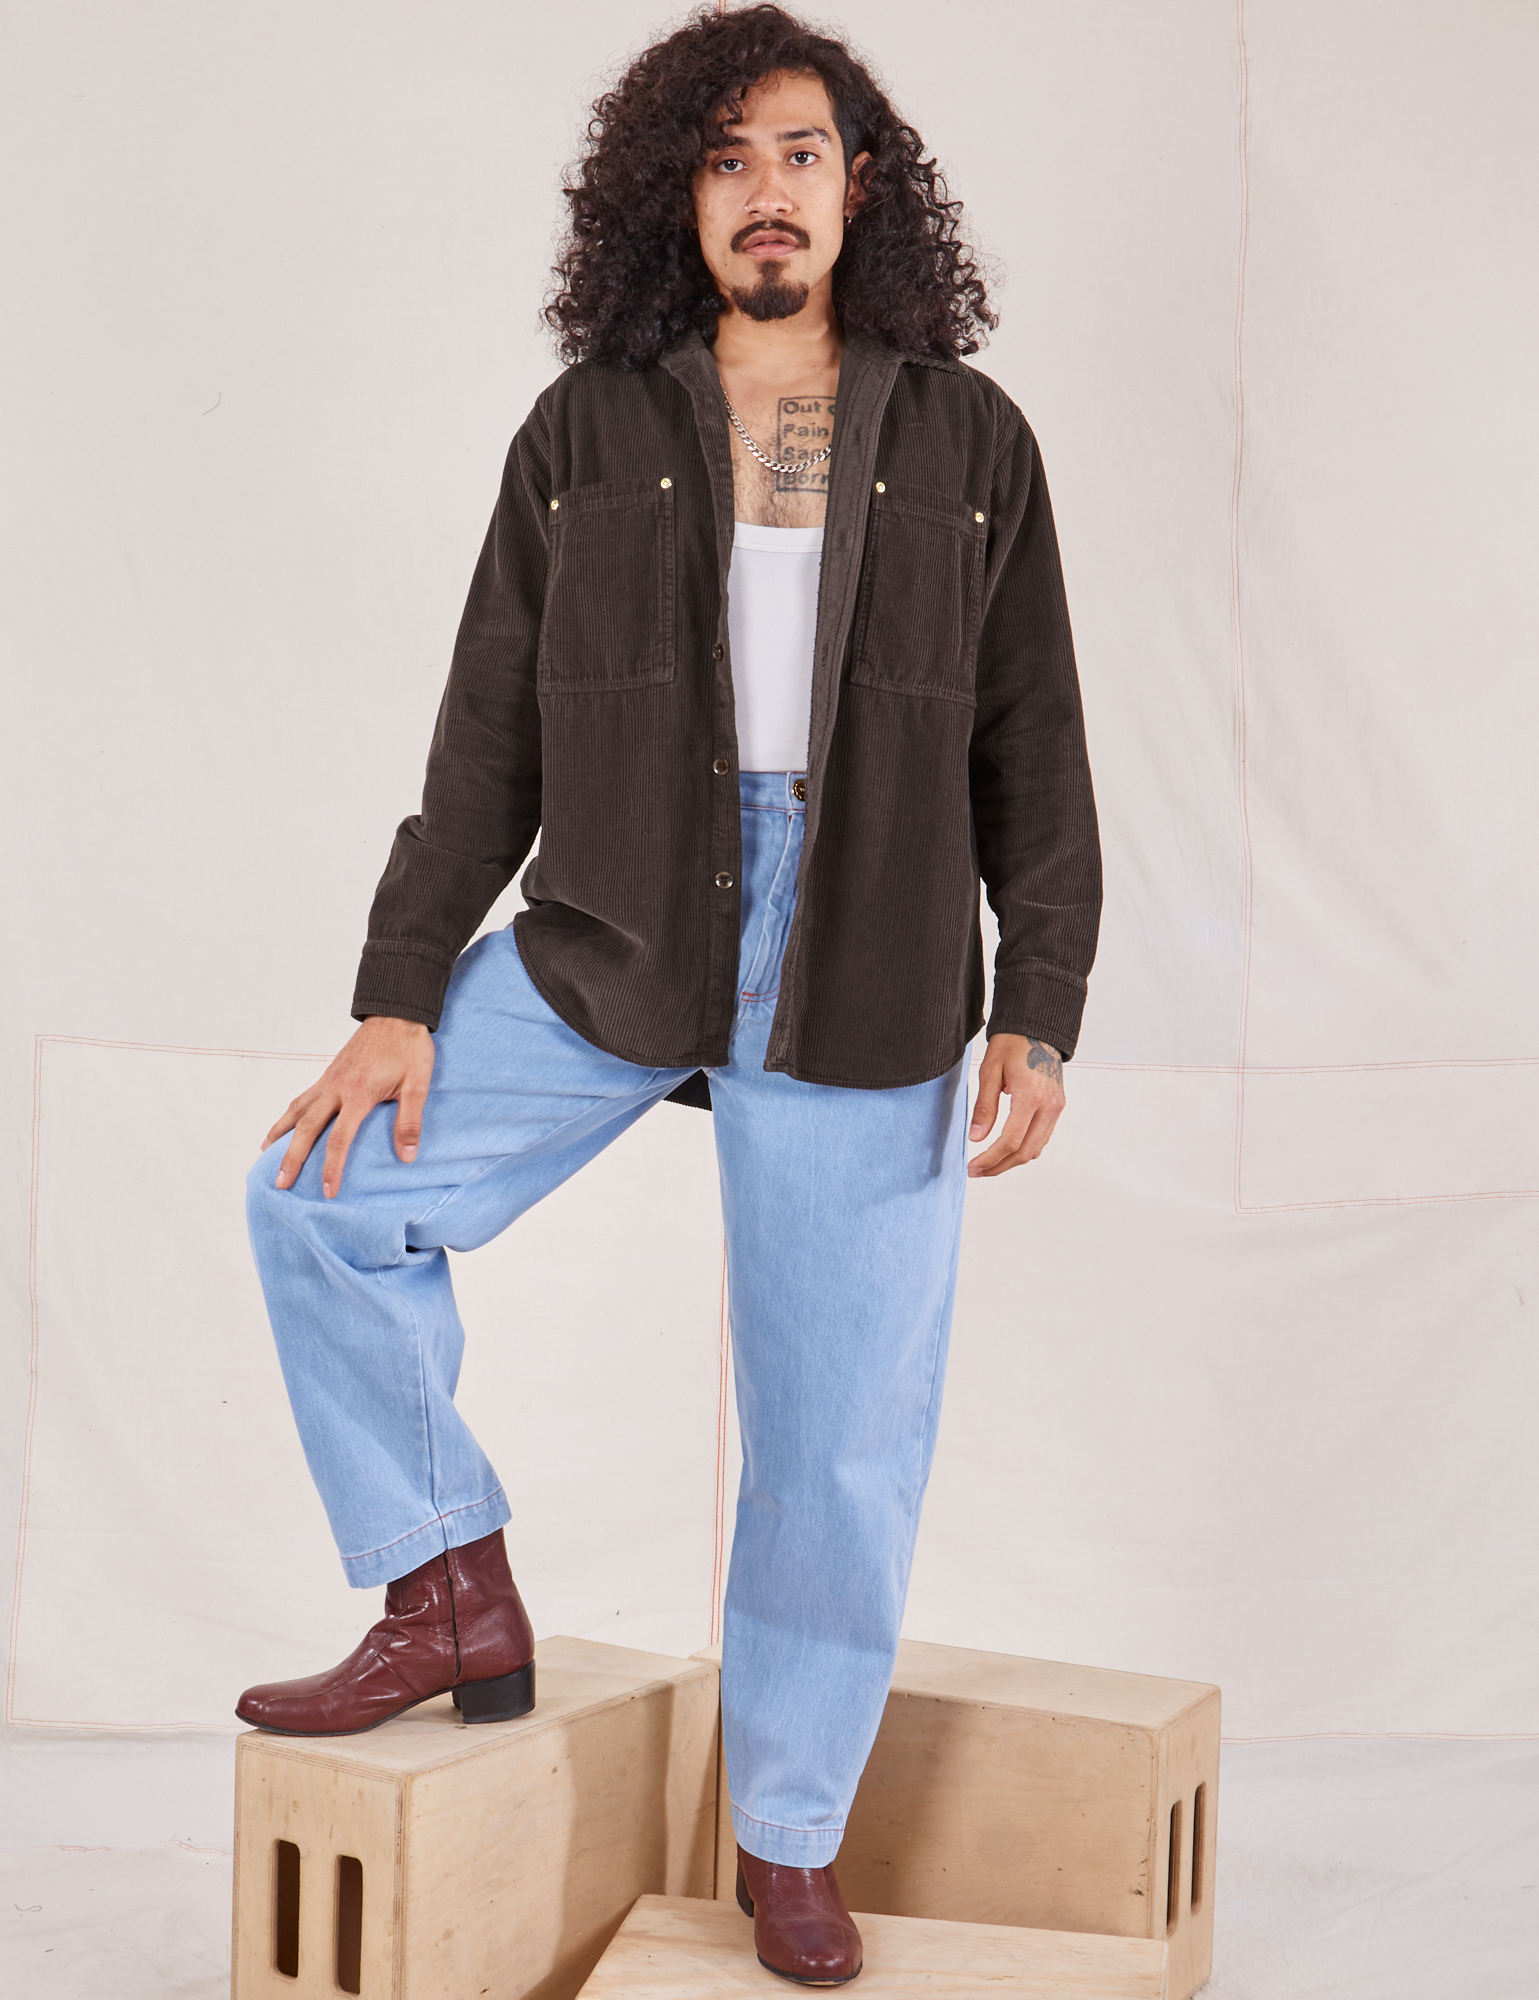 Jesse is wearing Corduroy Overshirt in Espresso Brown with a vintage off-white Cropped Tank Top underneath and light wash Denim Trouser Jeans